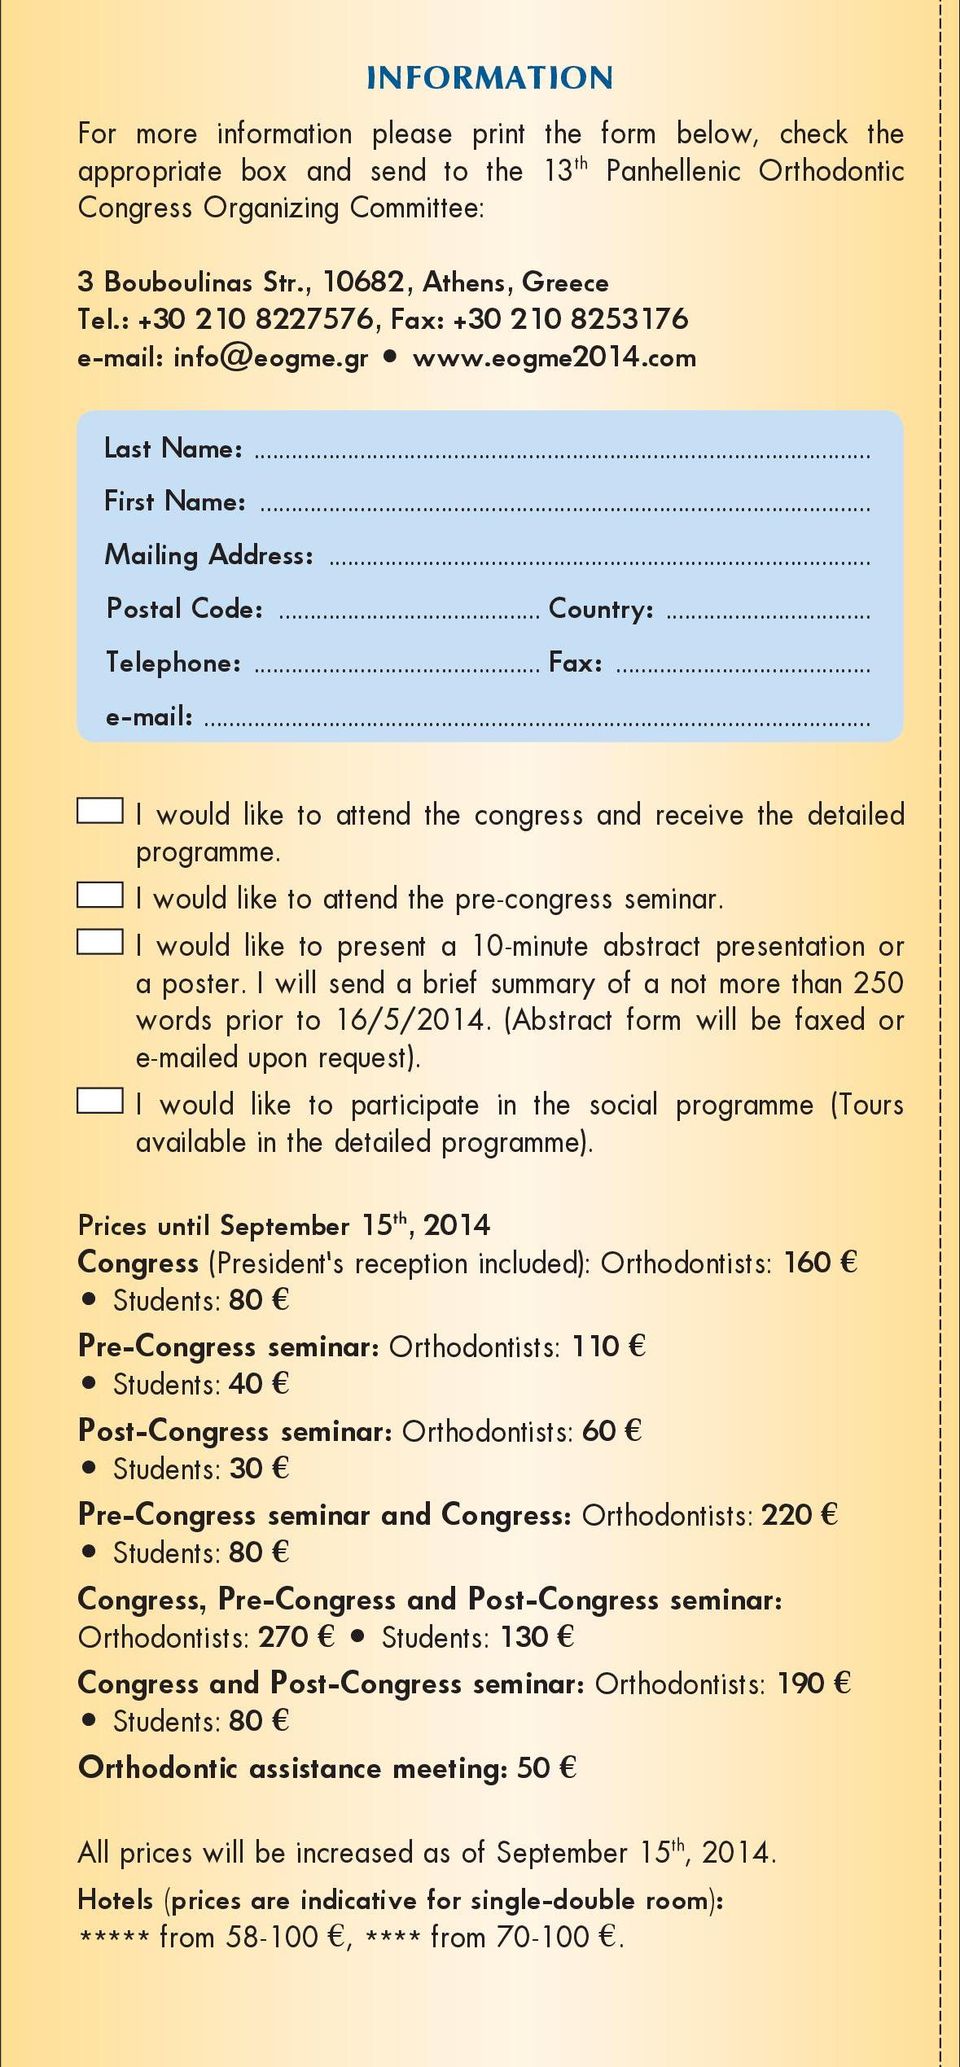 .. Fax:... e-mail:... I would like to attend the congress and receive the detailed programme. I would like to attend the pre-congress seminar.